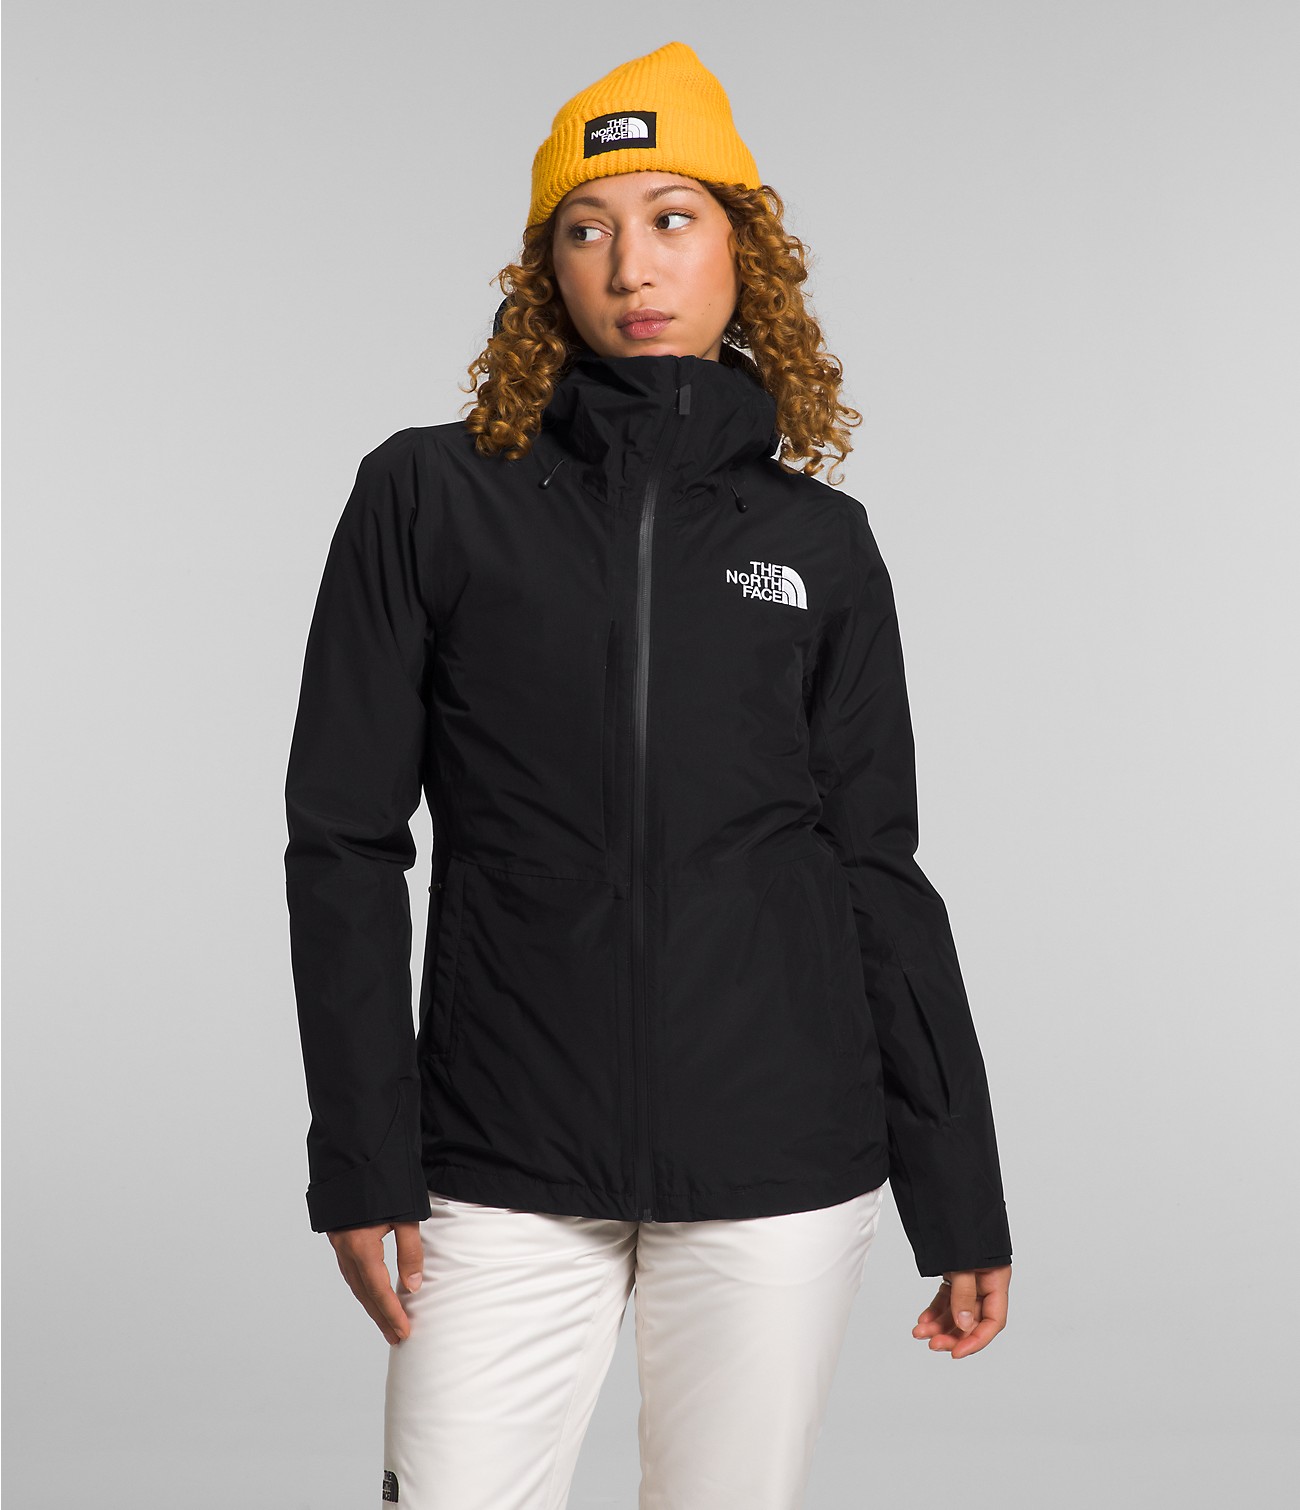 Unlock Wilderness' choice in the Oakley Vs North Face comparison, the ThermoBall™ Eco Snow Triclimate® Jacket by The North Face